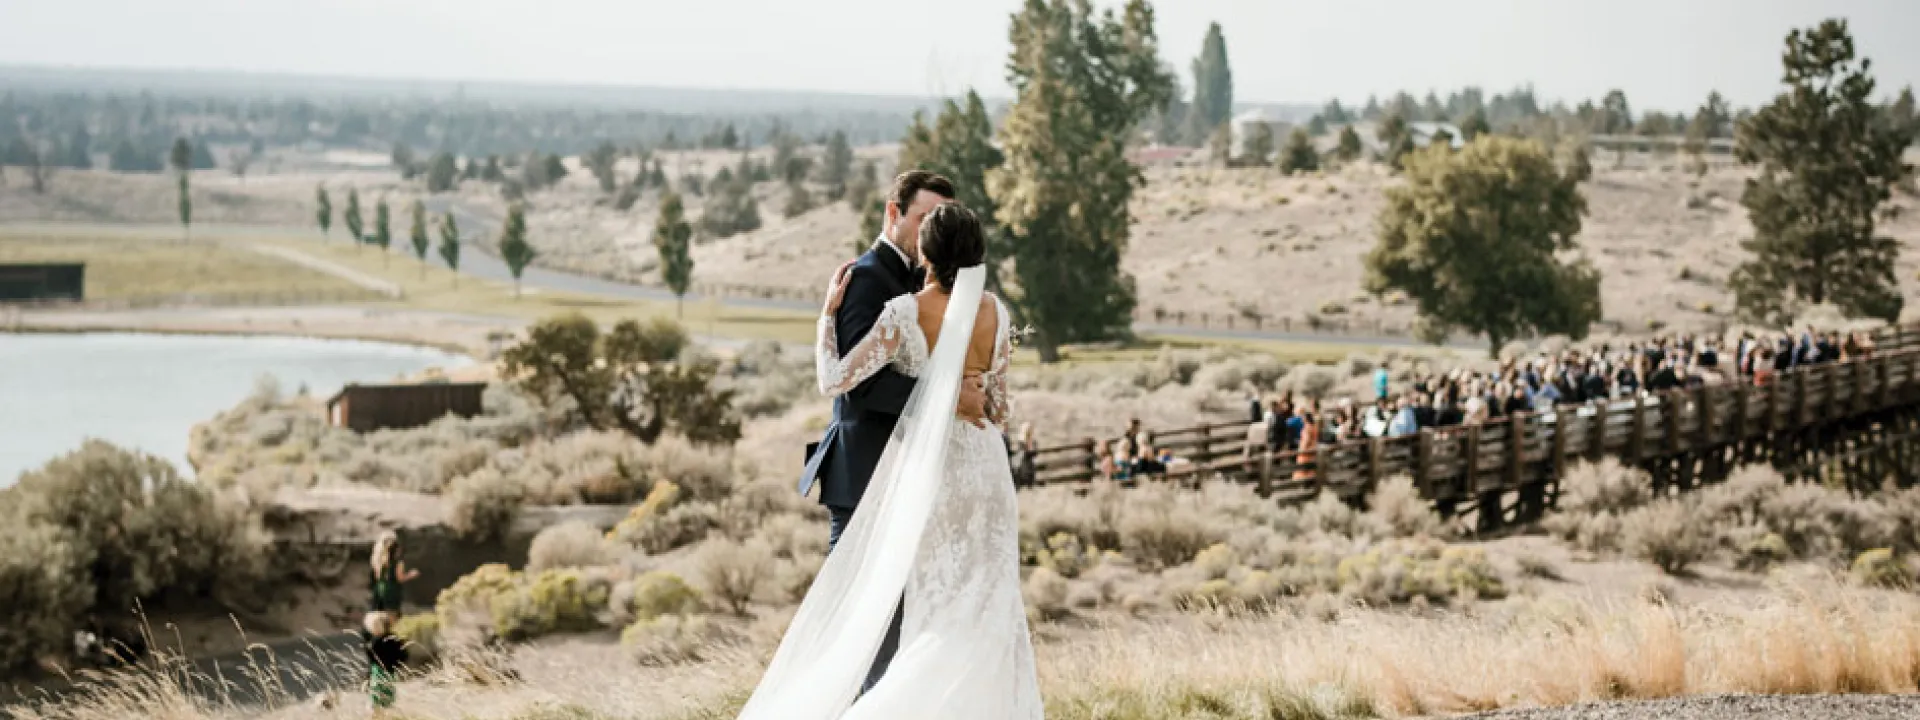 The hills and valleys of Central Oregon span beyond the couple as they pose at Brasada Ranch